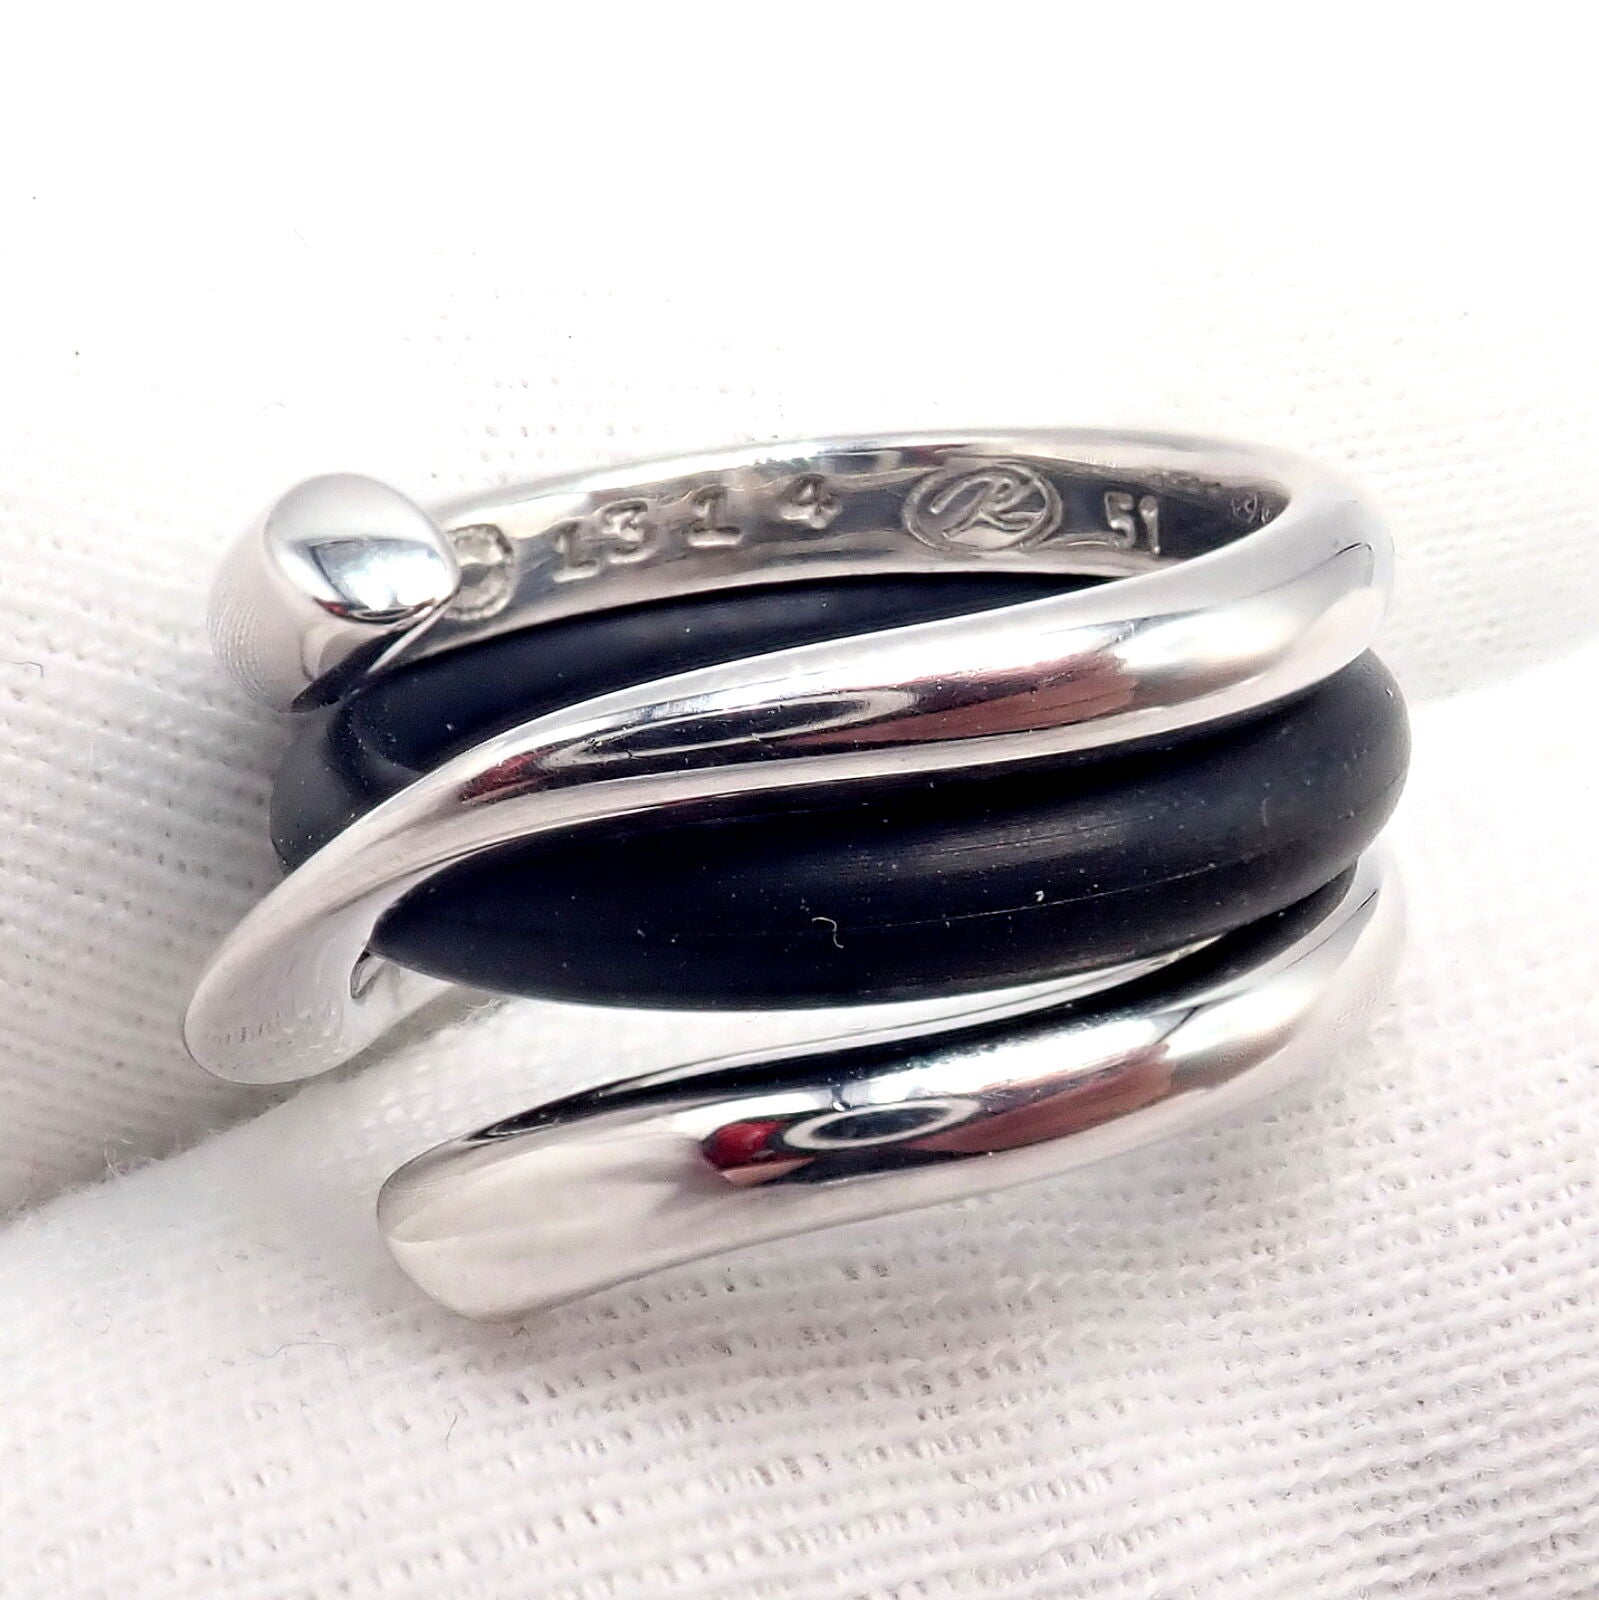 Georg Jensen Jewelry & Watches:Fine Jewelry:Rings Authentic! Georg Jensen 18K White Gold Magic Rubber Ring sz 5.5 51